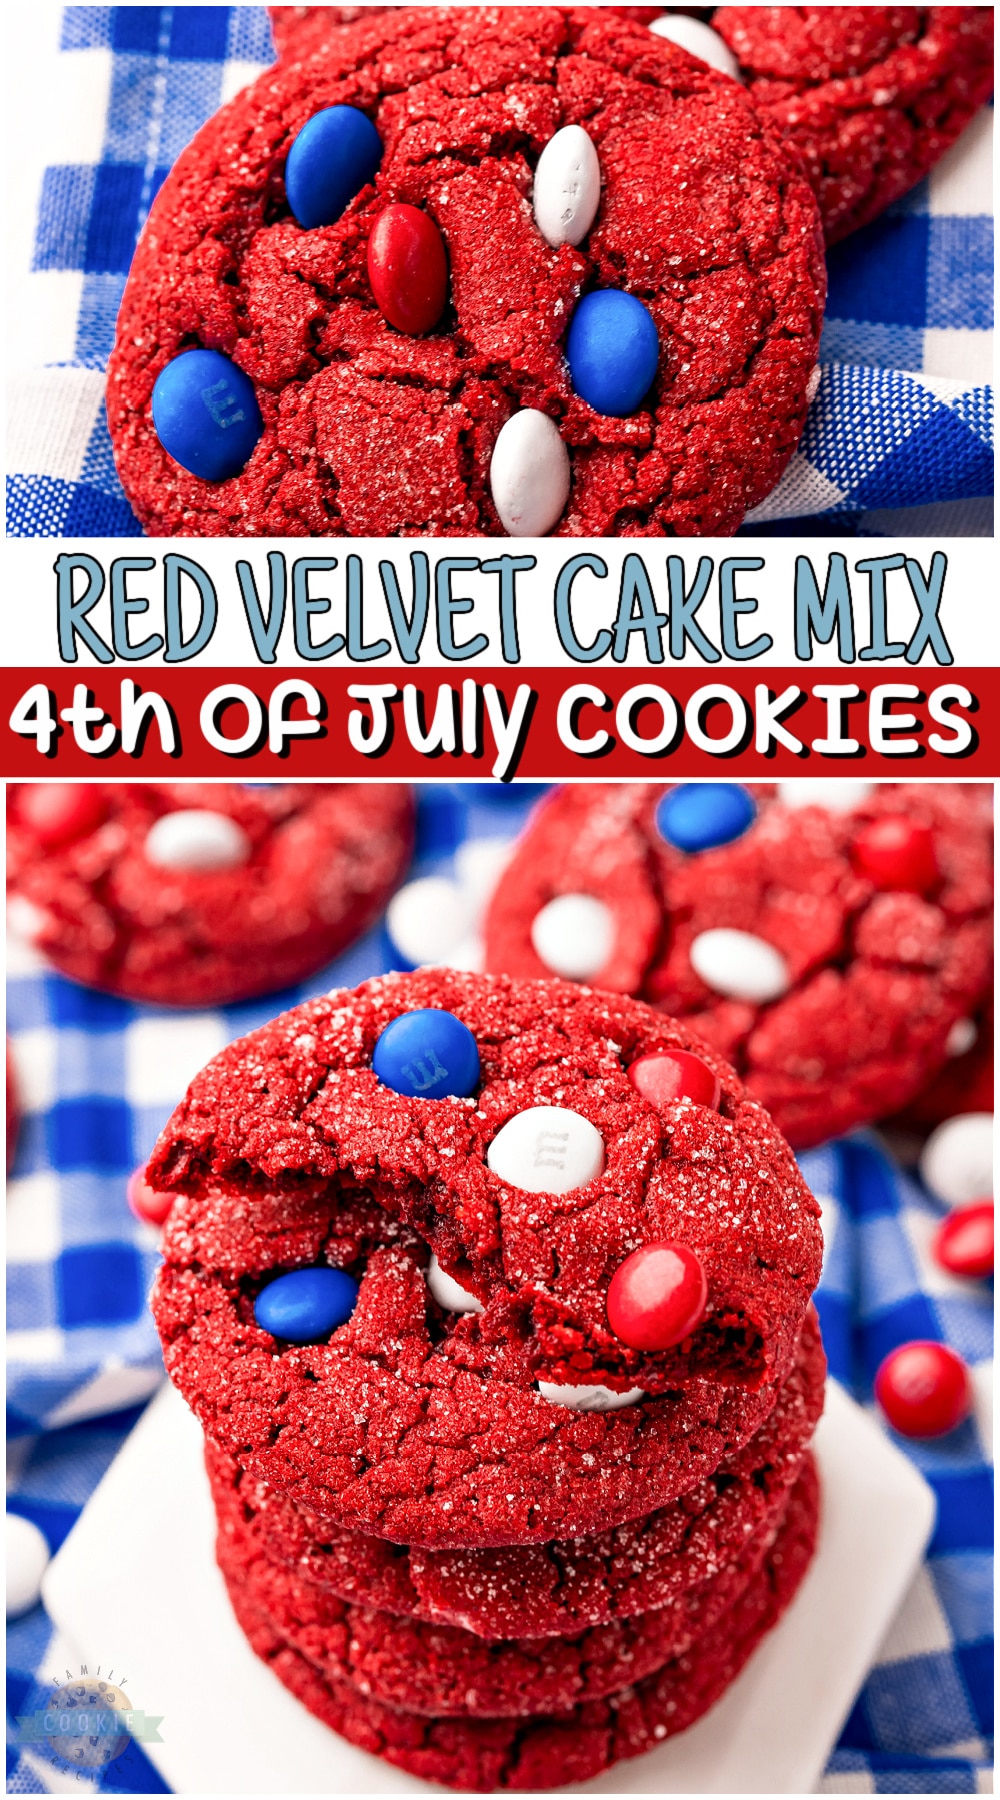 These red velvet cake mix cookies will be the hit of any fourth of July party. Made with boxed cake mix and colorful patriotic M&Ms, every bite is festive, fun, and delicious! #cookies #redwhiteblue #4thofJuly #cakemix #easyrecipe from FAMILY COOKIE RECIPES via @buttergirls